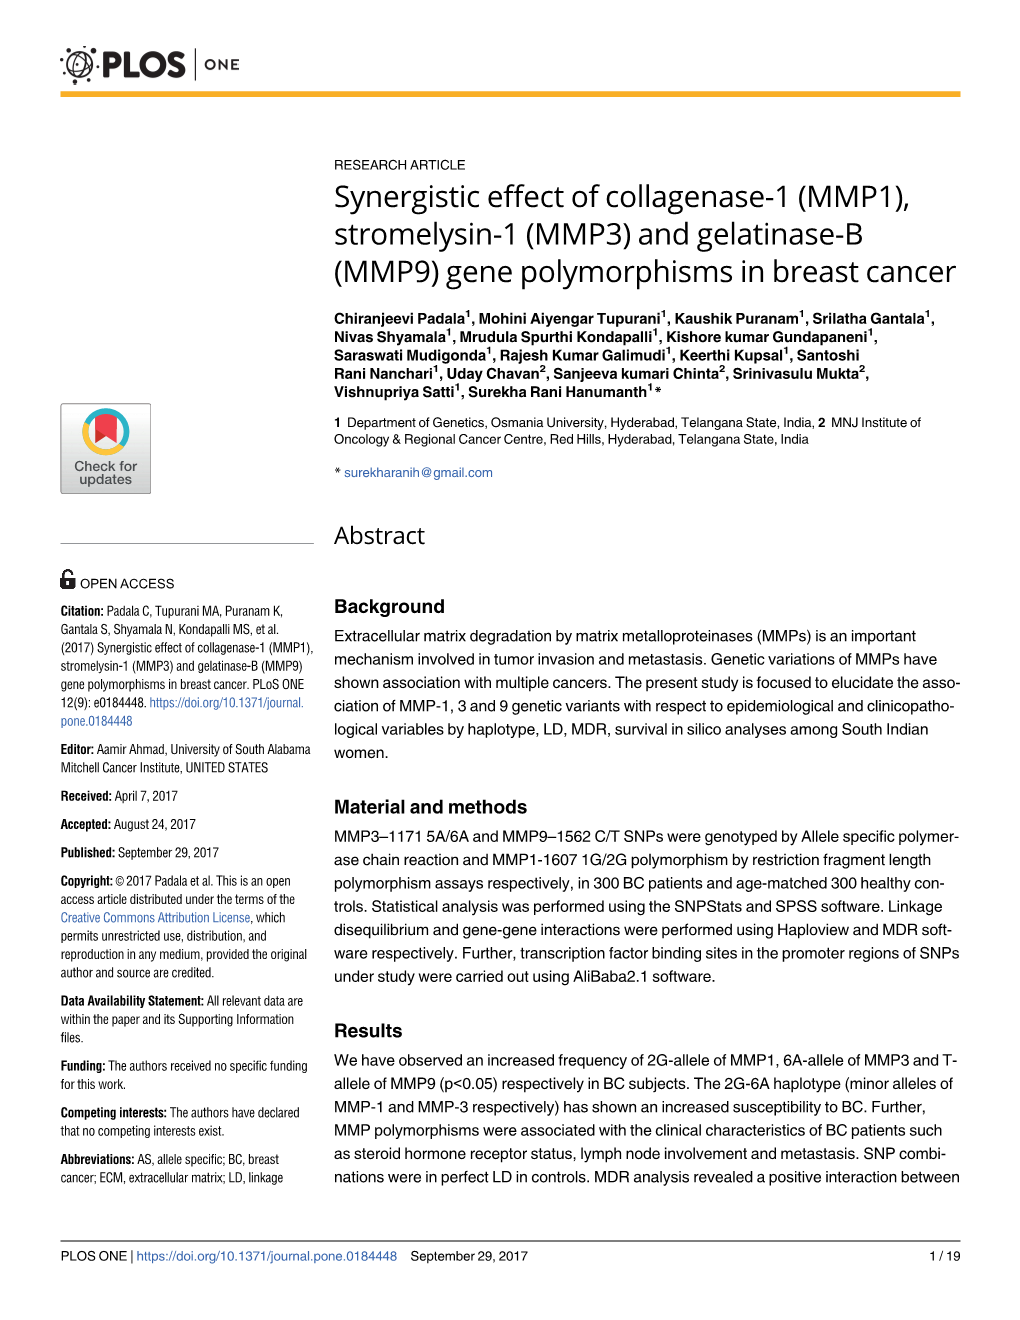 Synergistic Effect of Collagenase-1 (MMP1), Stromelysin-1 (MMP3) and Gelatinase-B (MMP9) Gene Polymorphisms in Breast Cancer